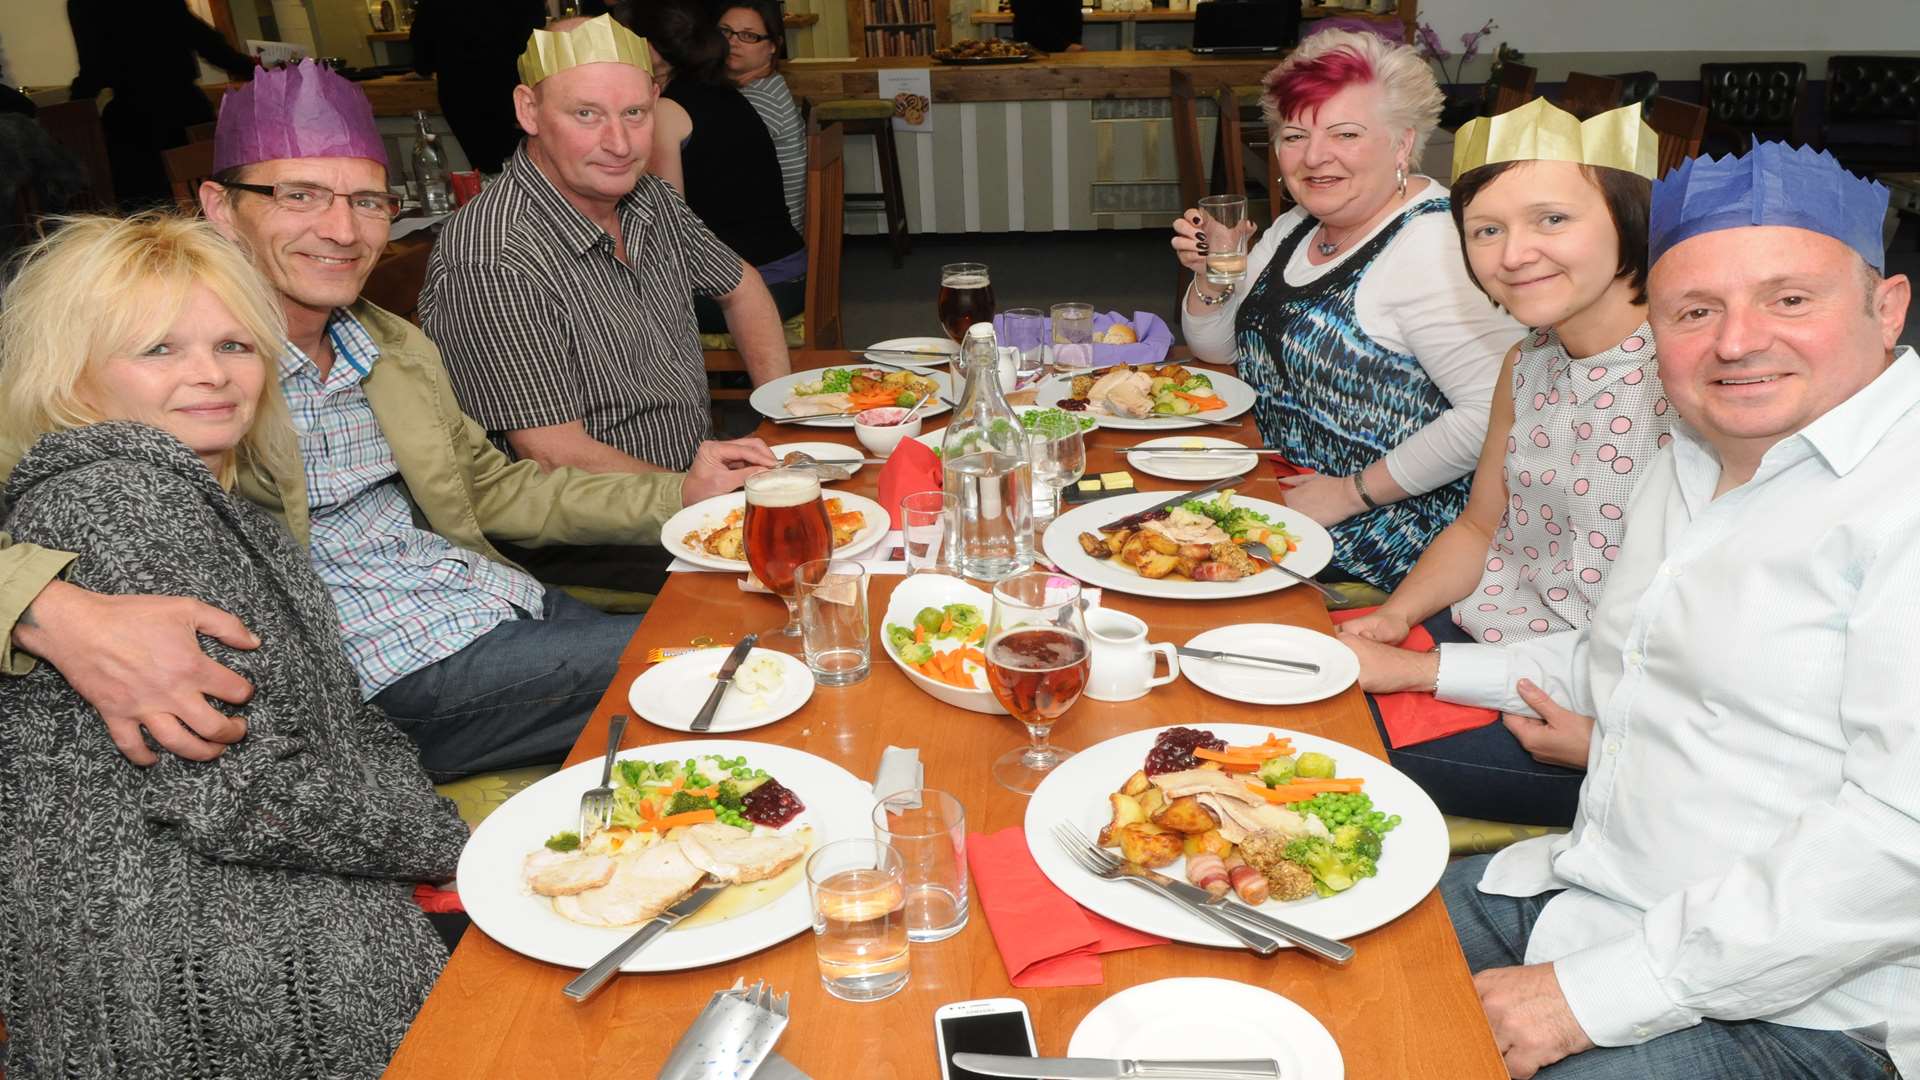 The KM organised a Christmas meal for flood victims that were hit over the festive period